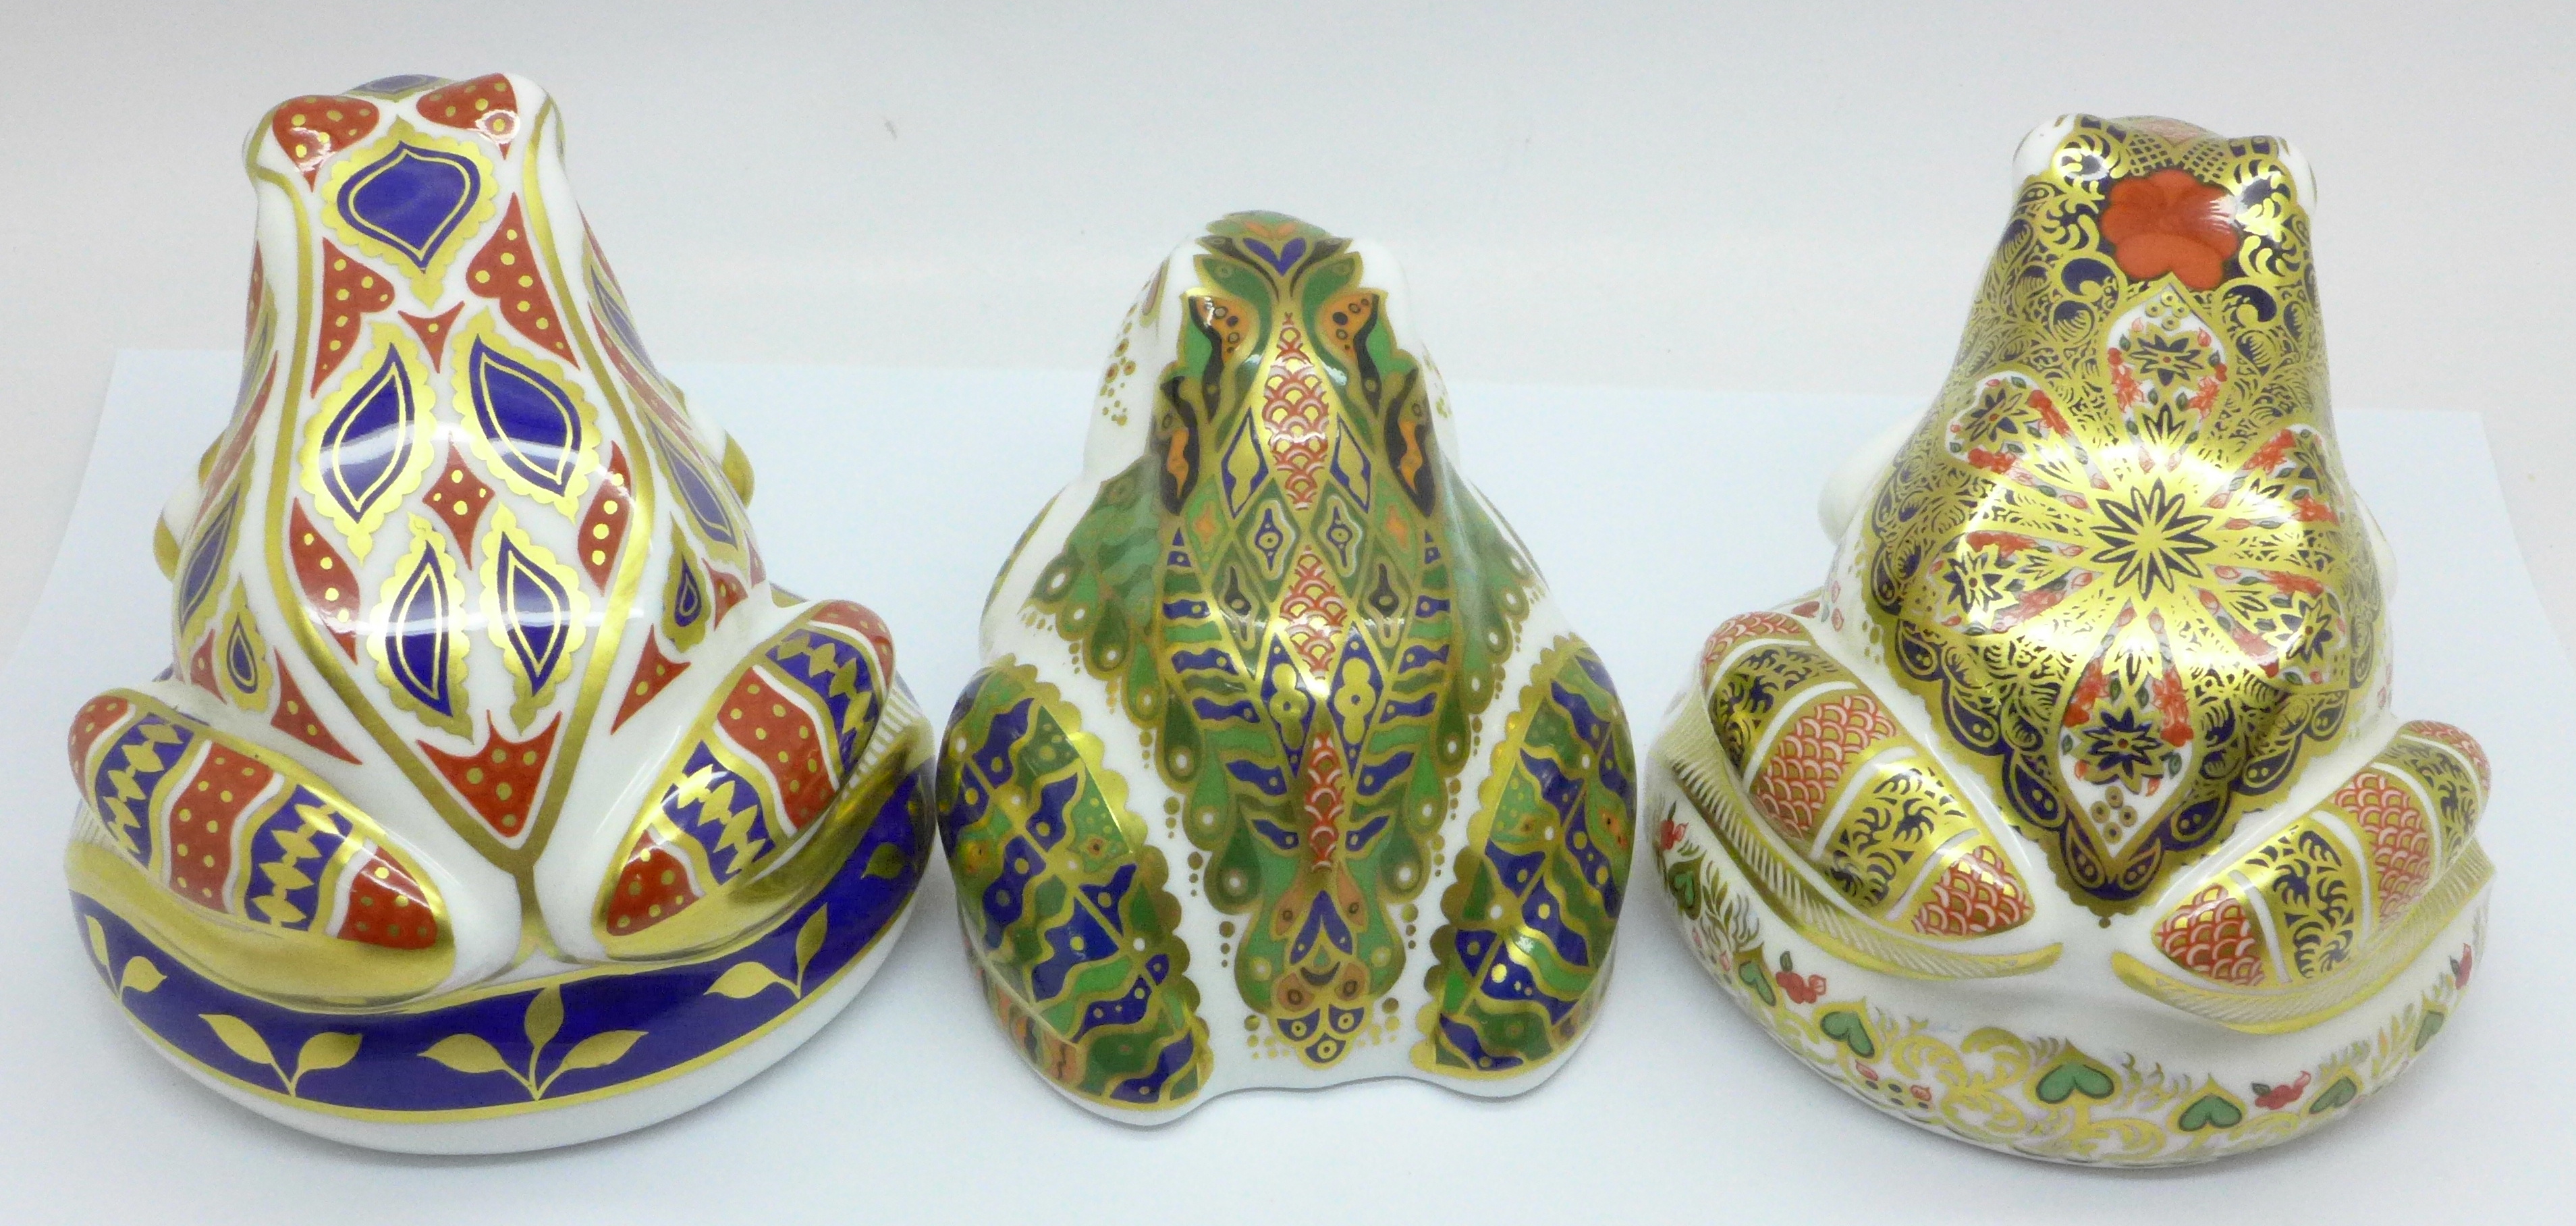 Three Royal Crown Derby paperweights, Mulberry Hall Frog, 296 of 500, gold stopper, signed by Sue - Image 4 of 8